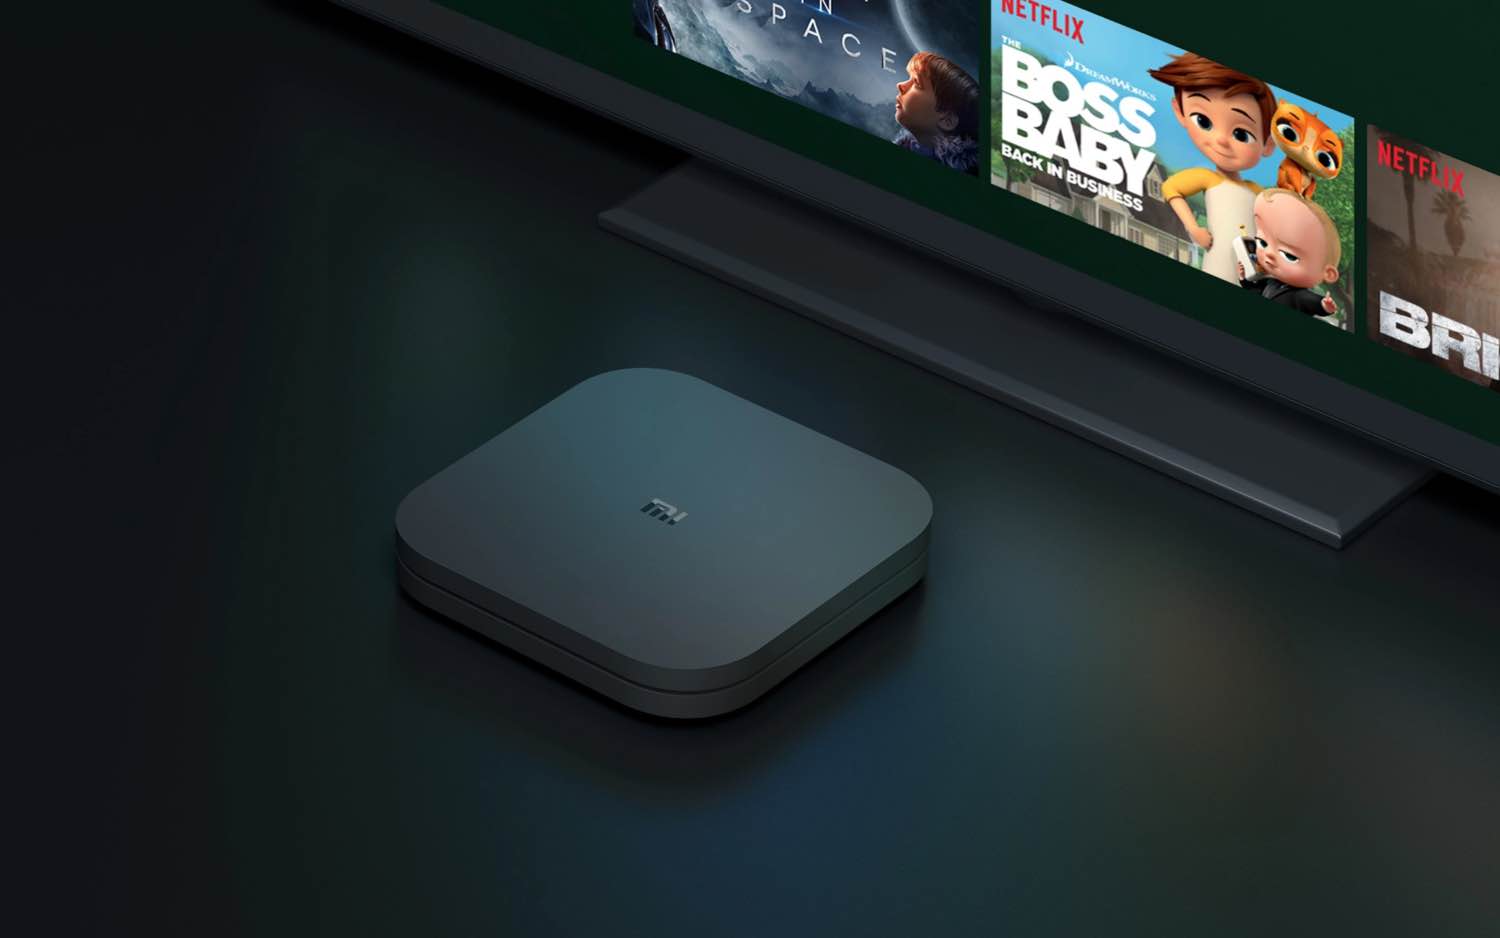 2018 Android Tv Box Complete Performance Chart